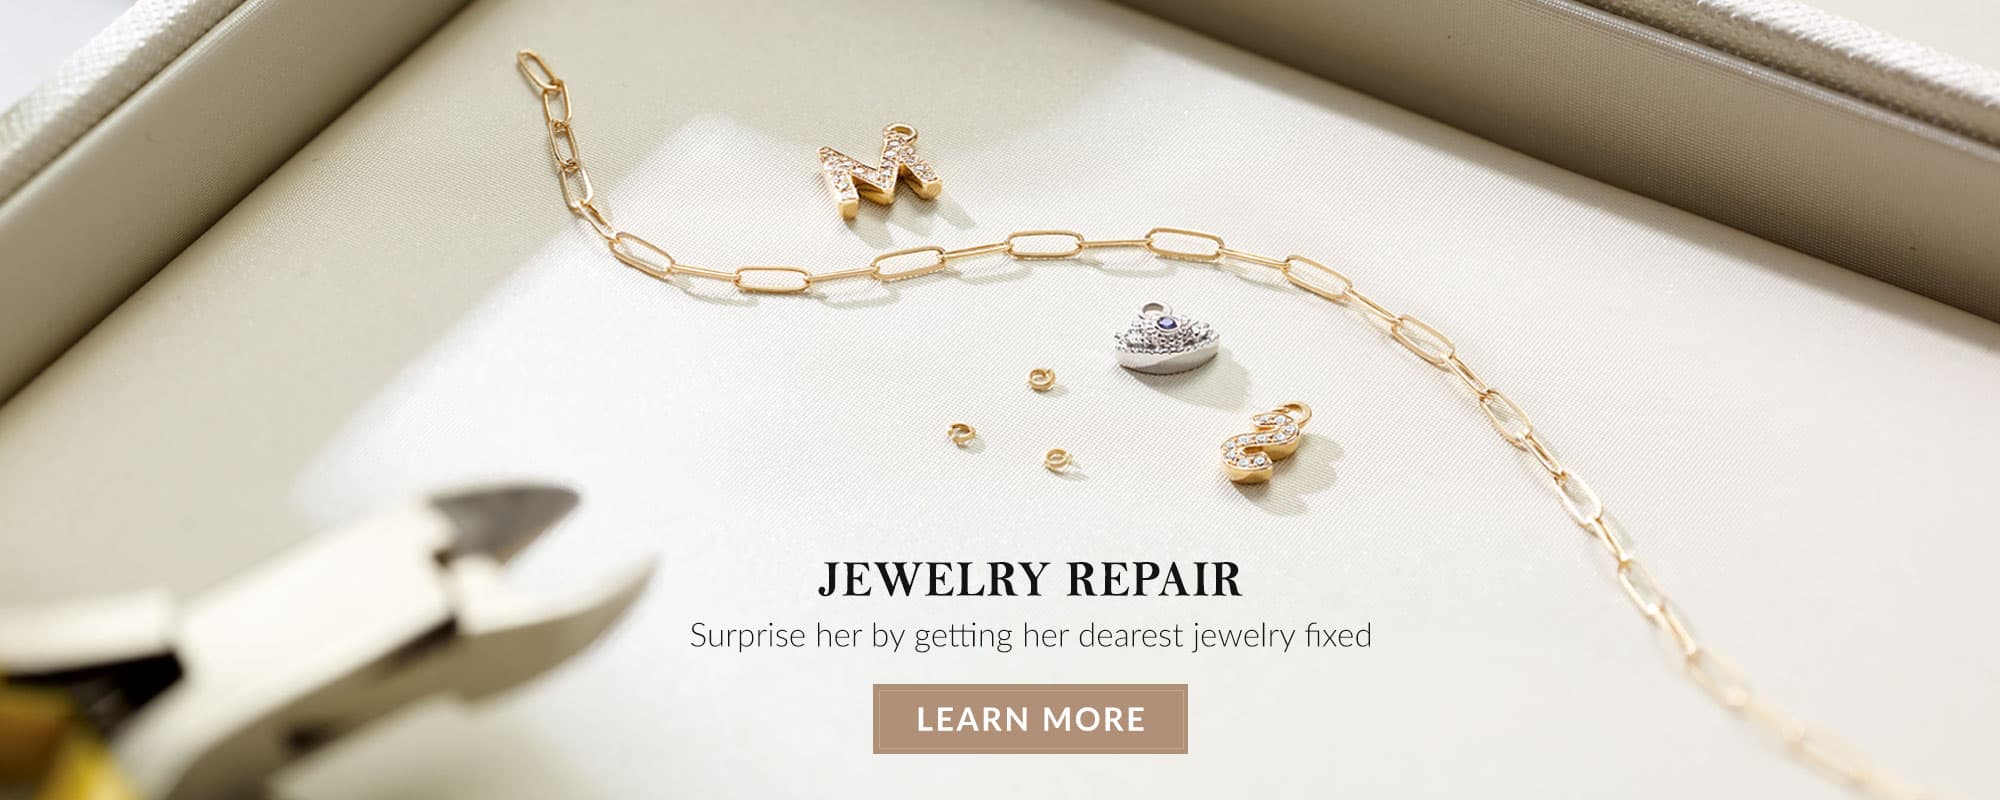 Jewelry Repair at Quality Jewelers